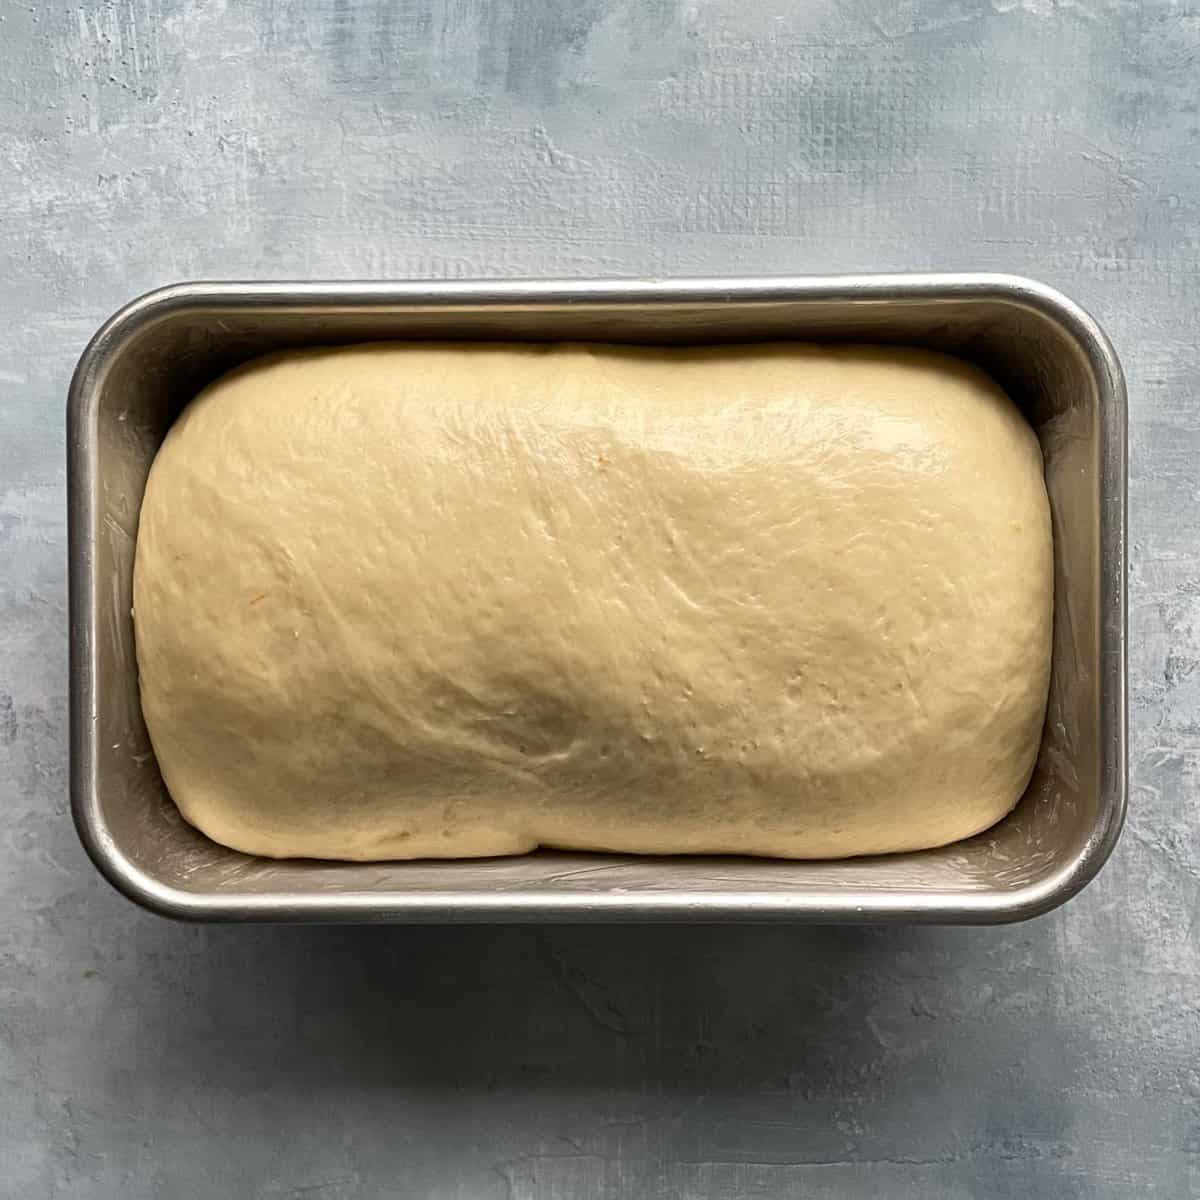 unbaked white bread loaf in the loaf pan after rising.